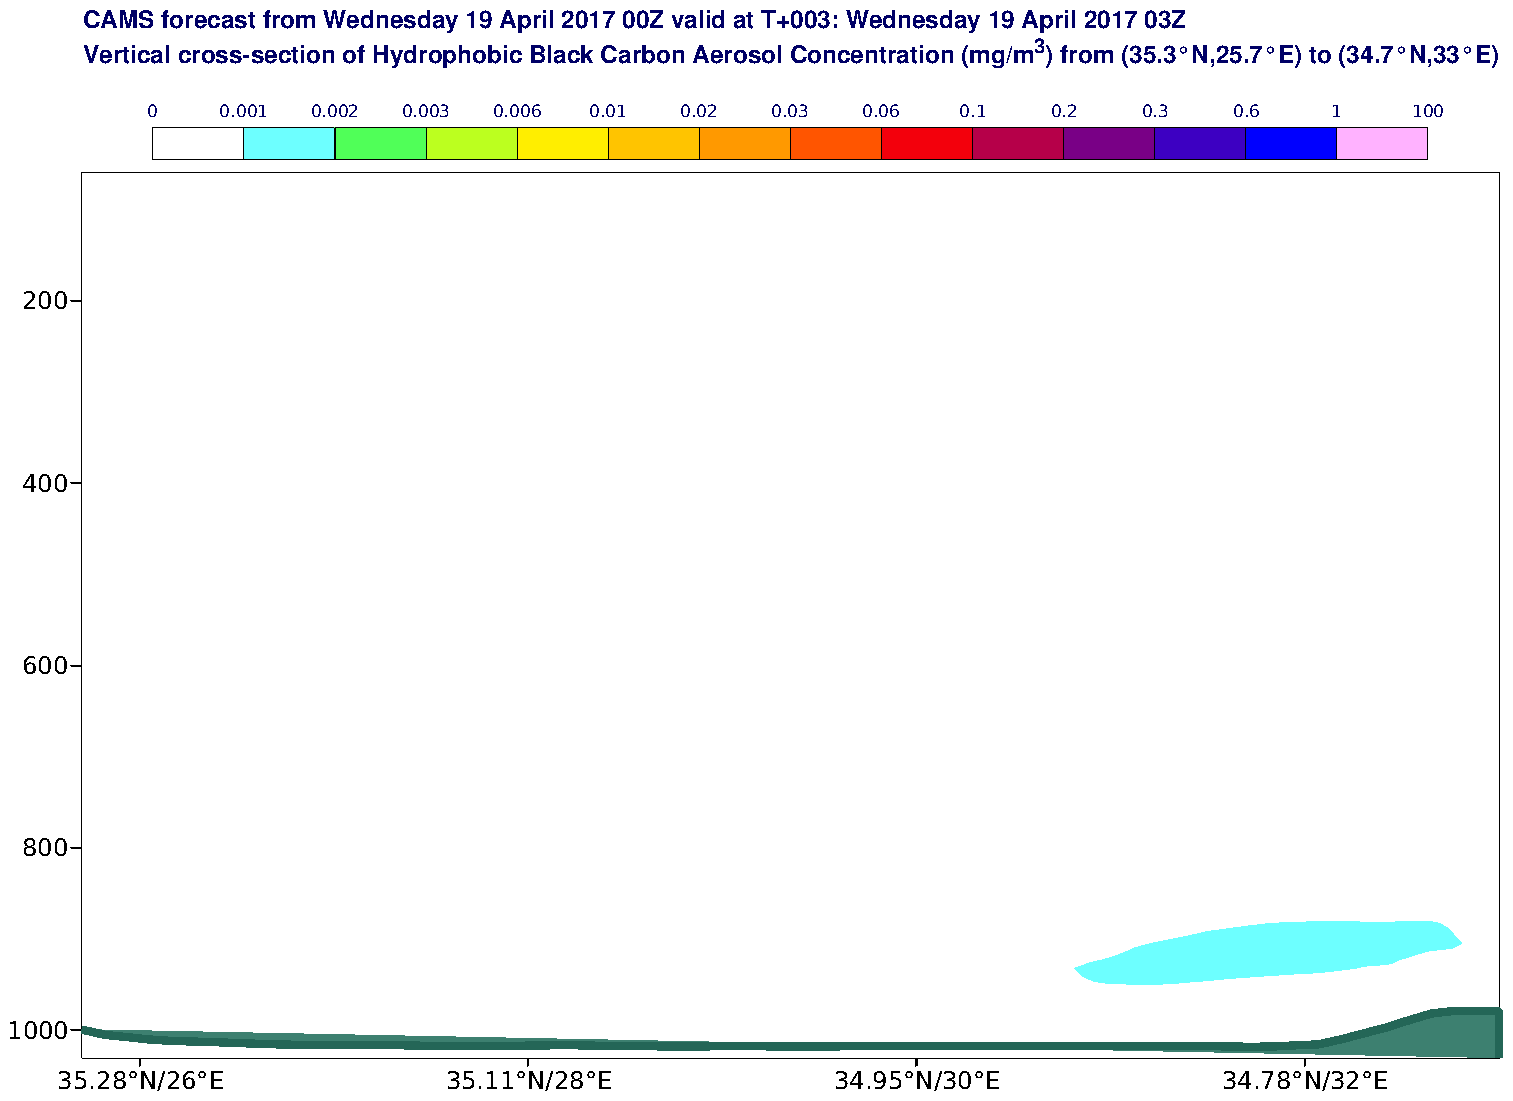 Vertical cross-section of Hydrophobic Black Carbon Aerosol Concentration (mg/m3) valid at T3 - 2017-04-19 03:00